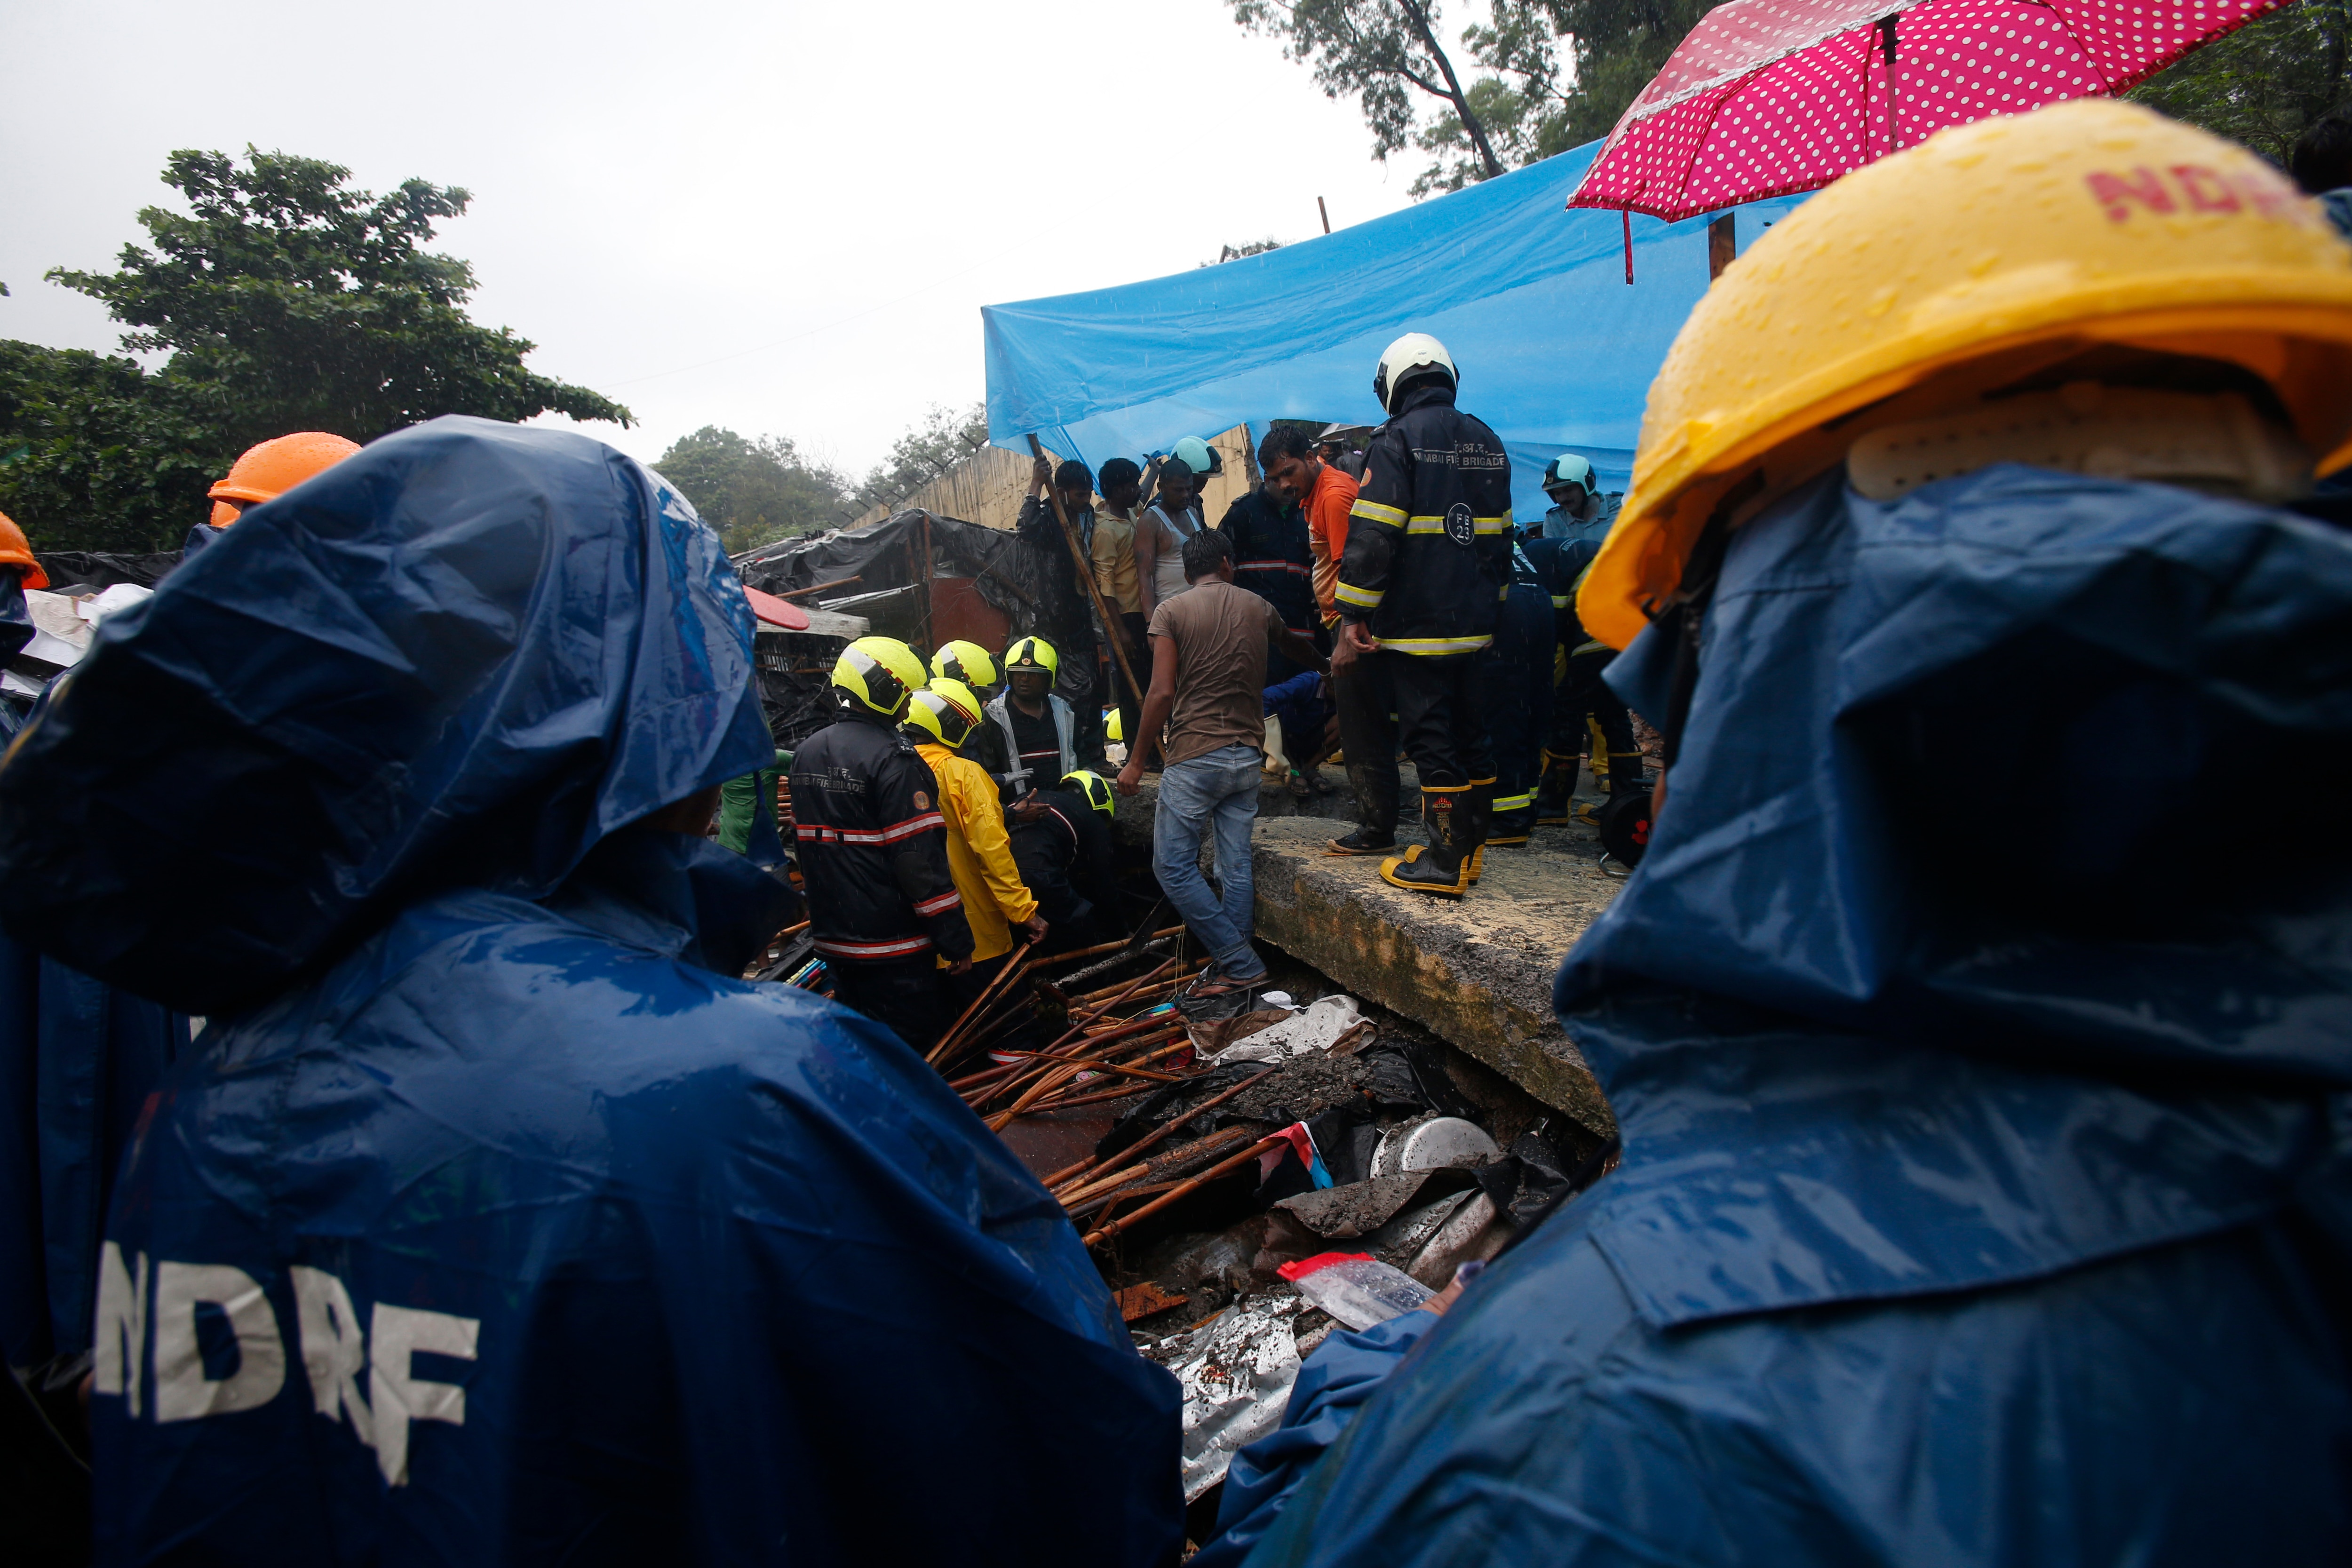 Rescuers of the National Disaster Response Force stand at the spot after heavy rainfall caused a wall to collapse onto shanties, in Mumbai, India.